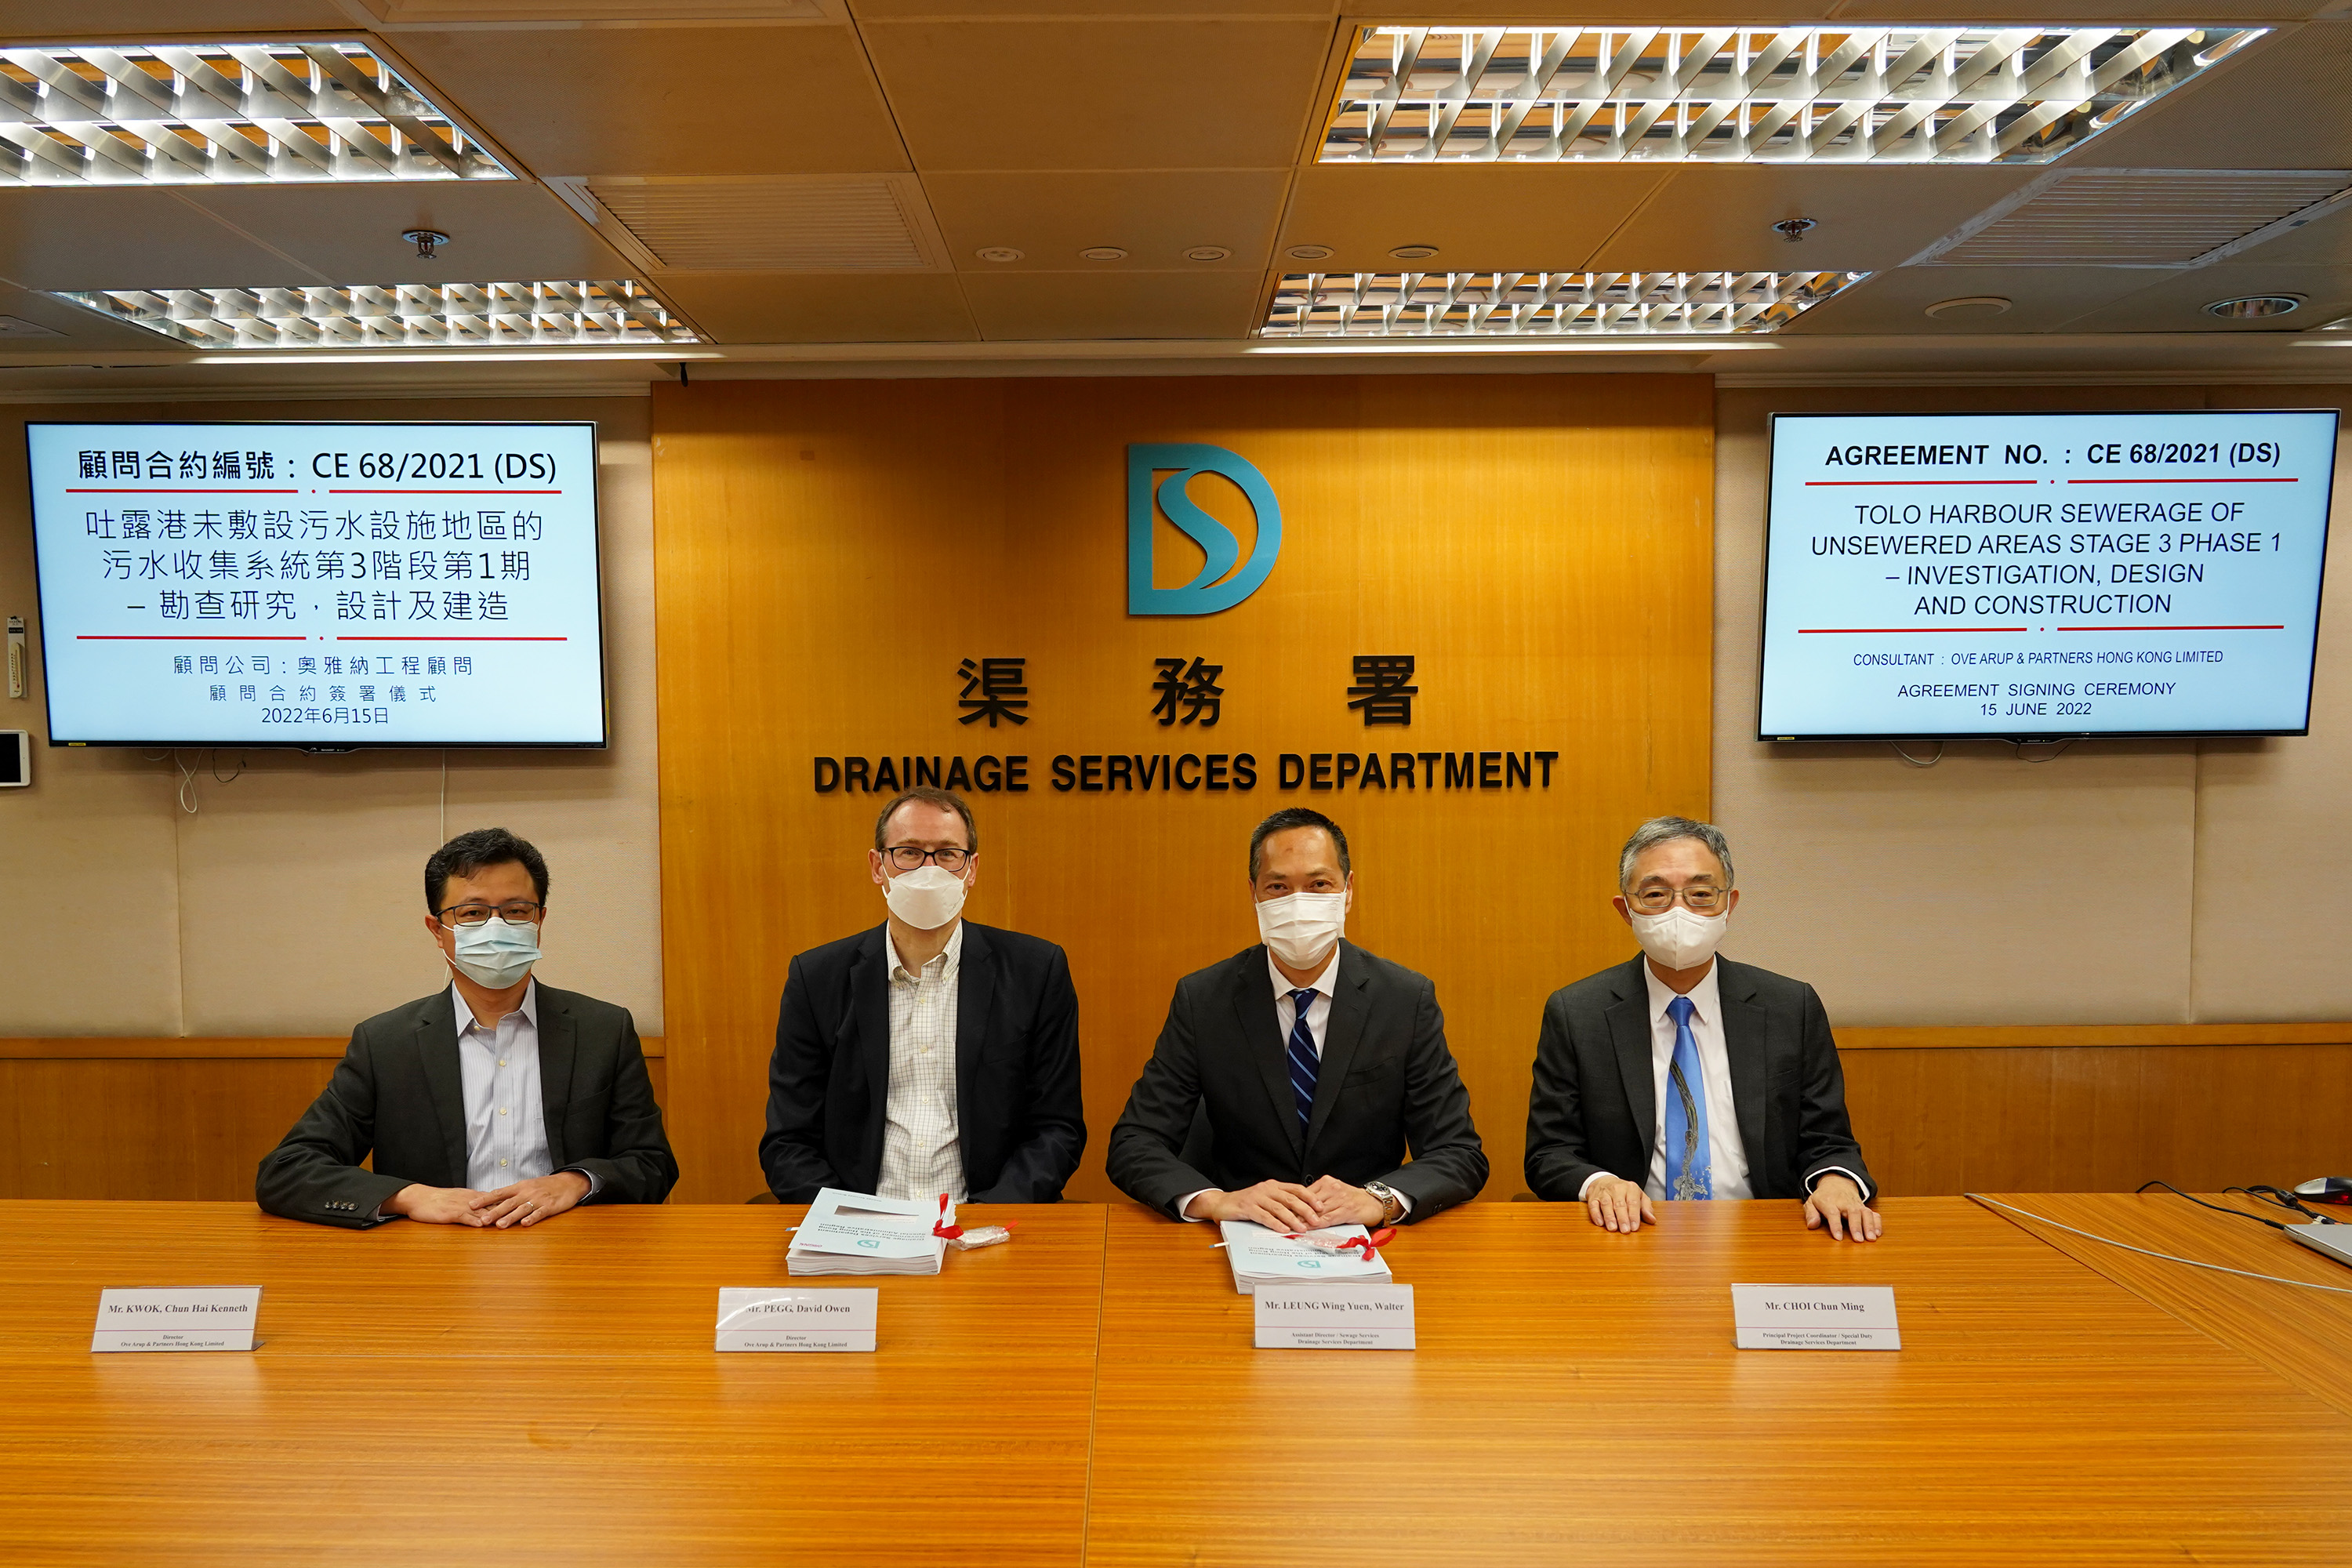 The Assistant Director/Sewage Services, Mr LEUNG Wing-yuen, Walter (second right), Principal Project Coordinator/Special Duty, Mr CHOI Chun-ming (first right) of DSD and the Director, Mr PEGG, David Owen (second left), Director, Mr KWOK Chun Hai, Kenneth (first left) of Ove Arup & Partners Hong Kong Limited attended the Agreement Signing Ceremony.